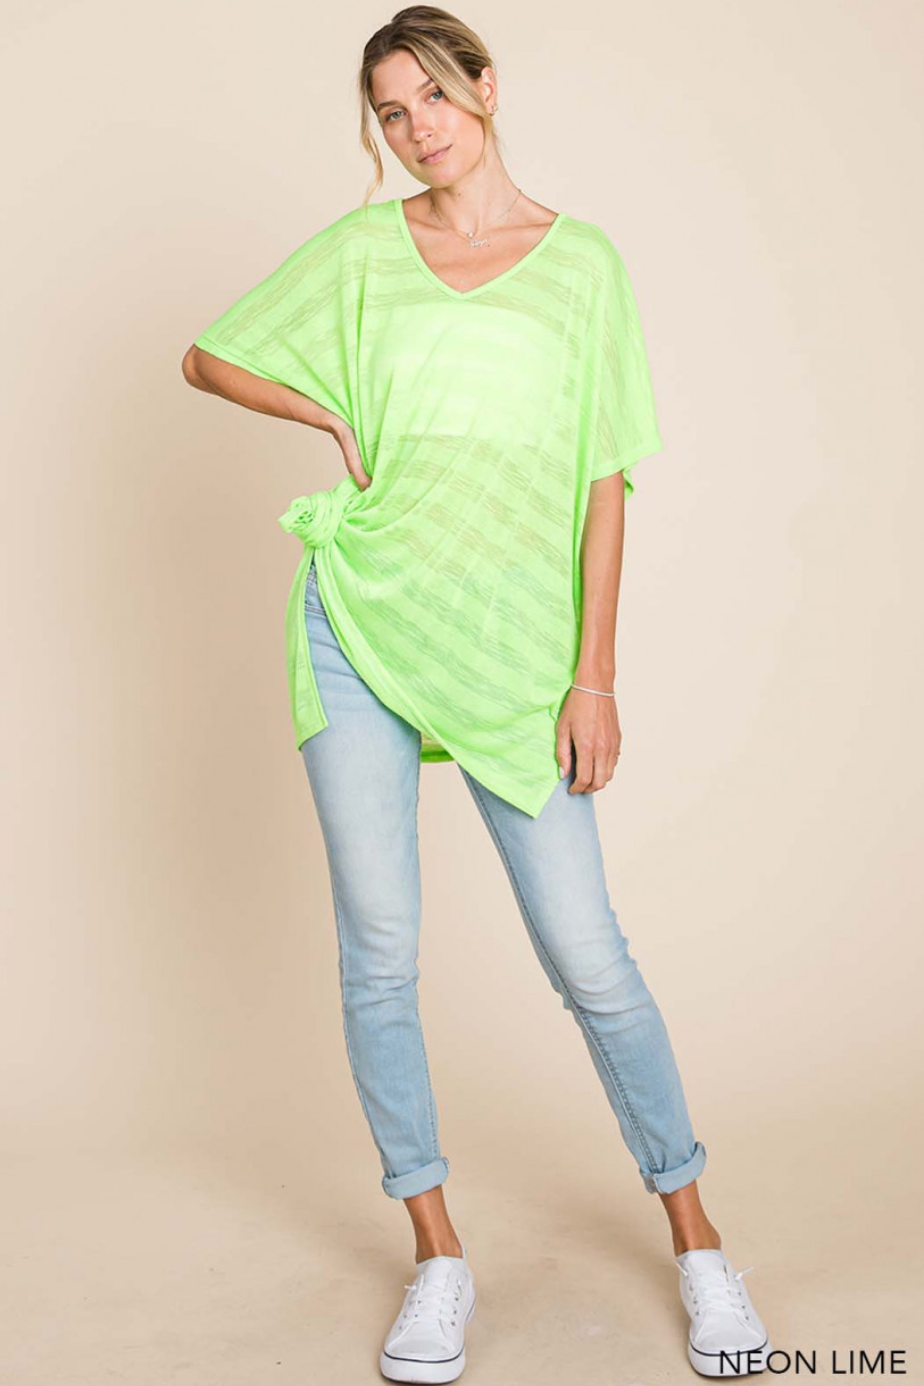 2 Colors - Striped Burnout Fabric Oversized Neon Tops